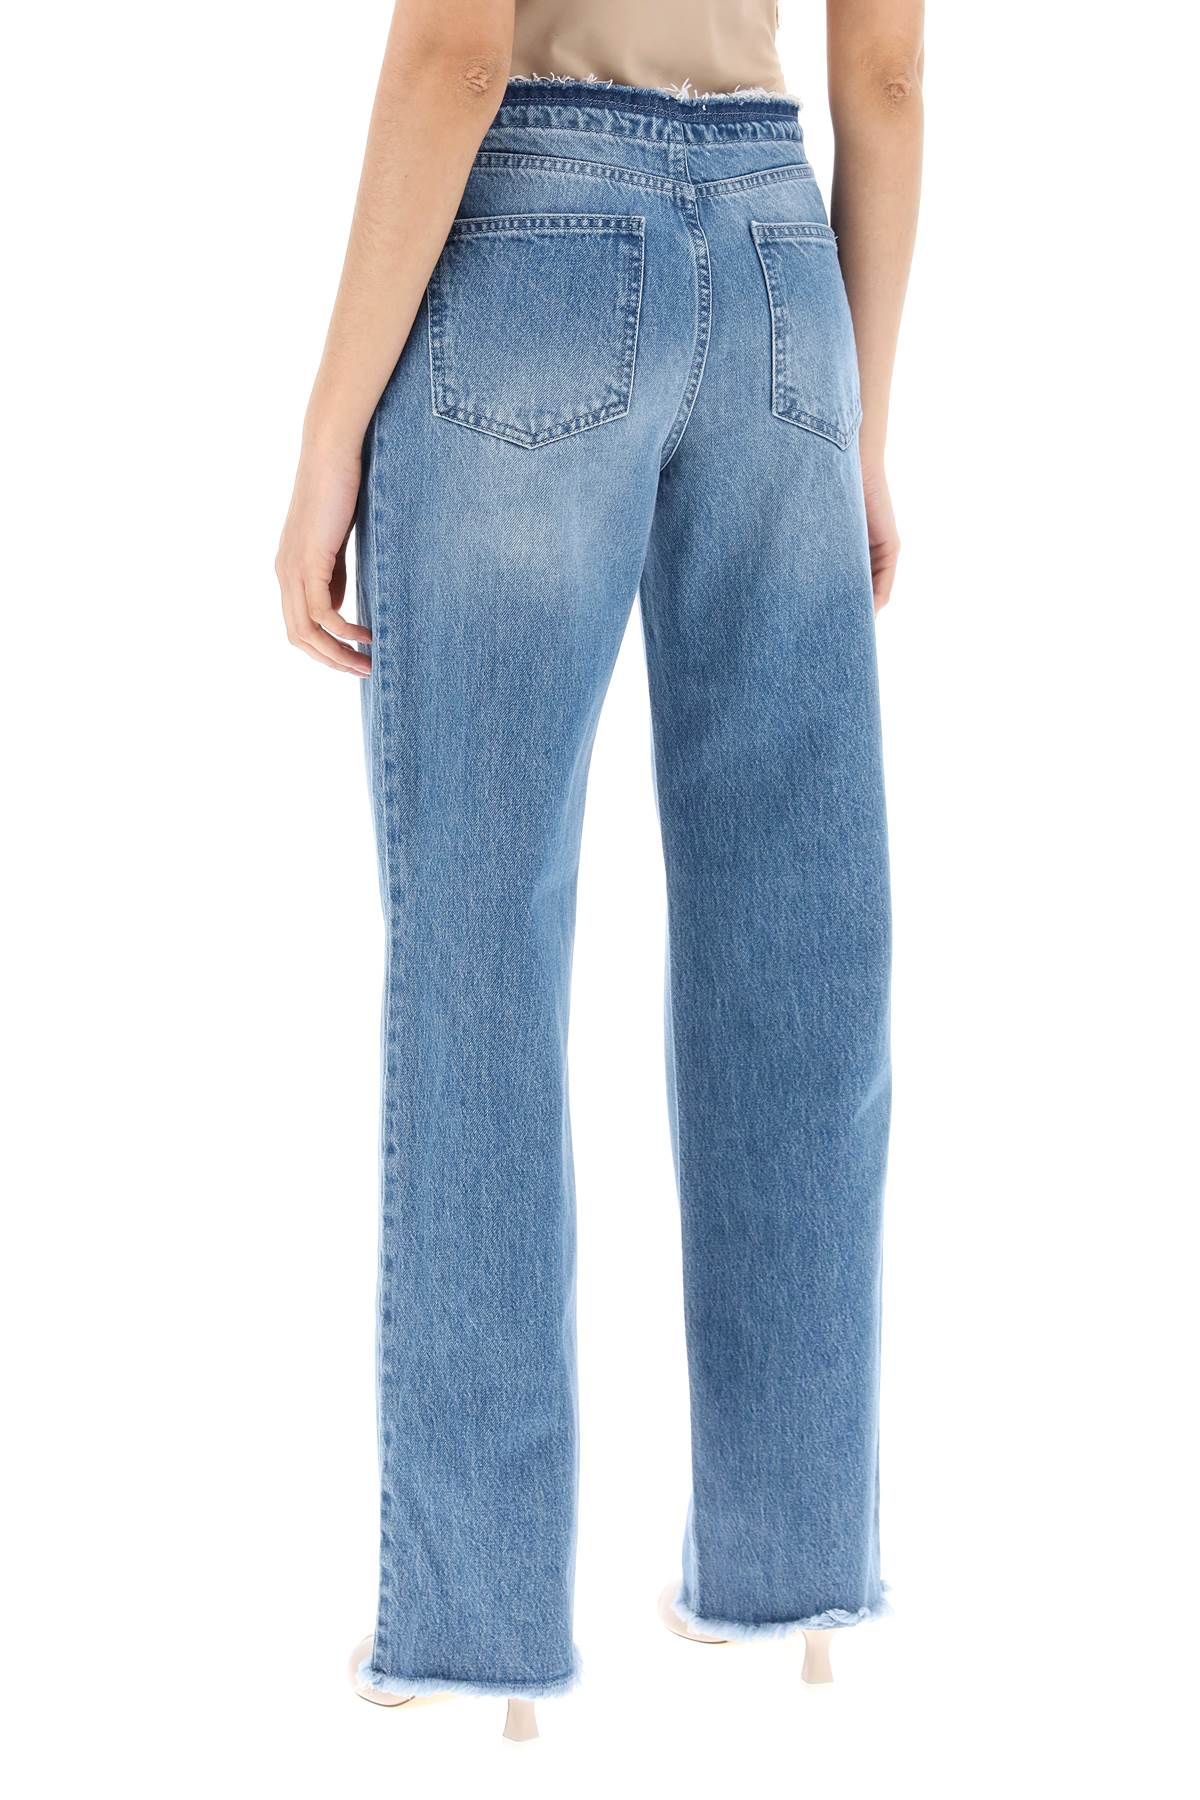 Mvp wardrobe straight leg levant jeans with a-2